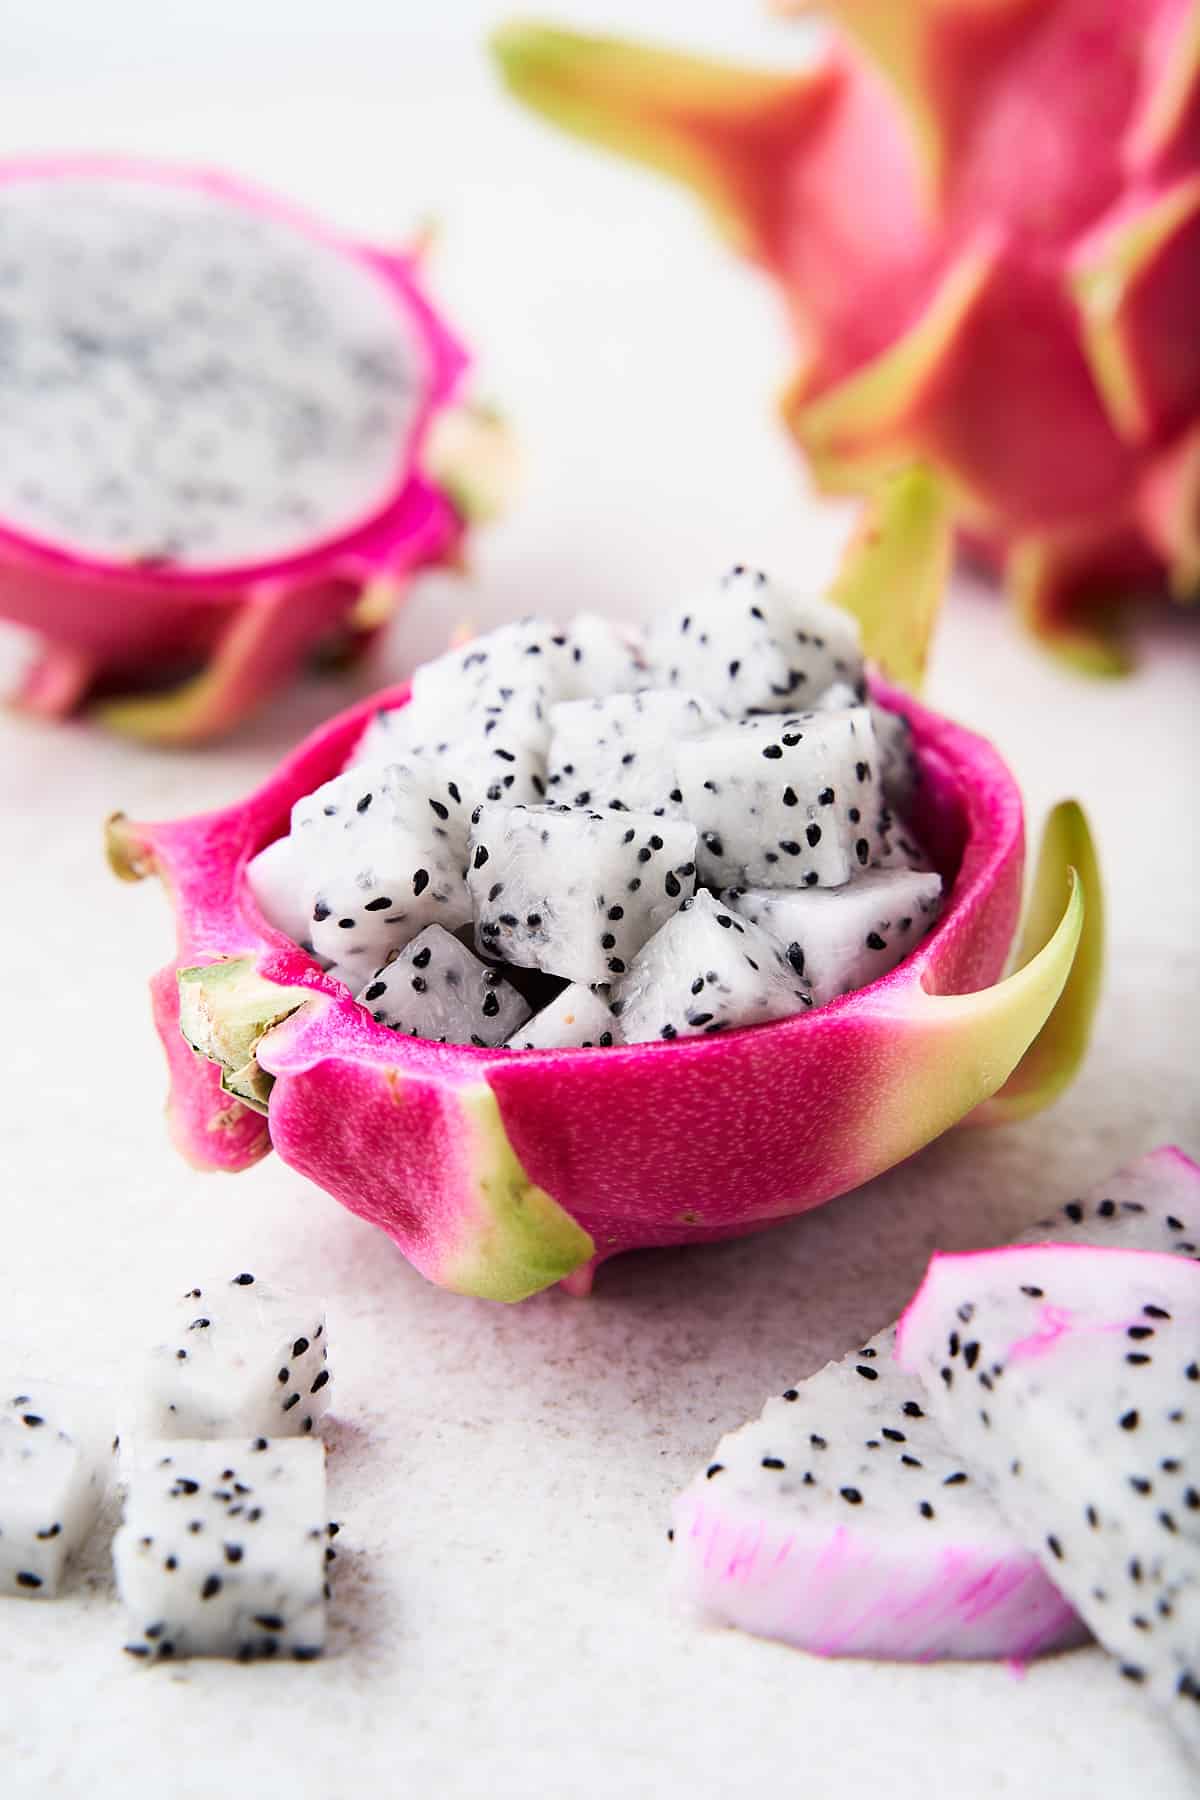 How To Cut Dragon Fruit (Step-By-Step Guide) | Live Eat Learn